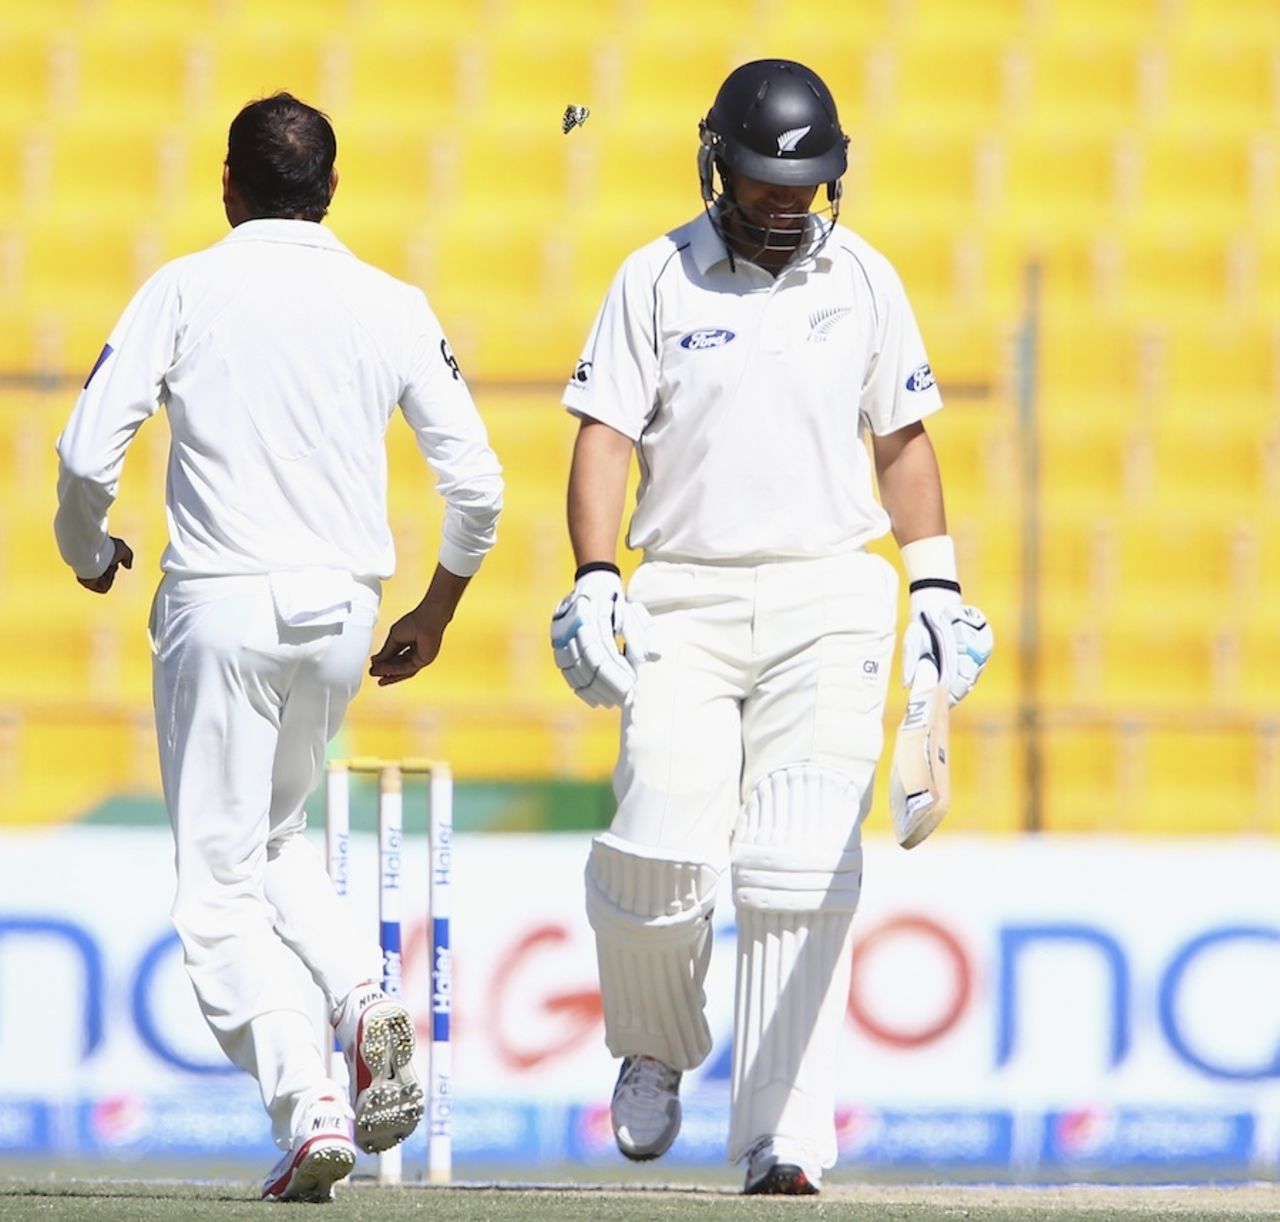 Ross Taylor was dismissed for a duck, Pakistan v New Zealand, 1st Test, Abu Dhabi, 3rd day, November 11, 2014